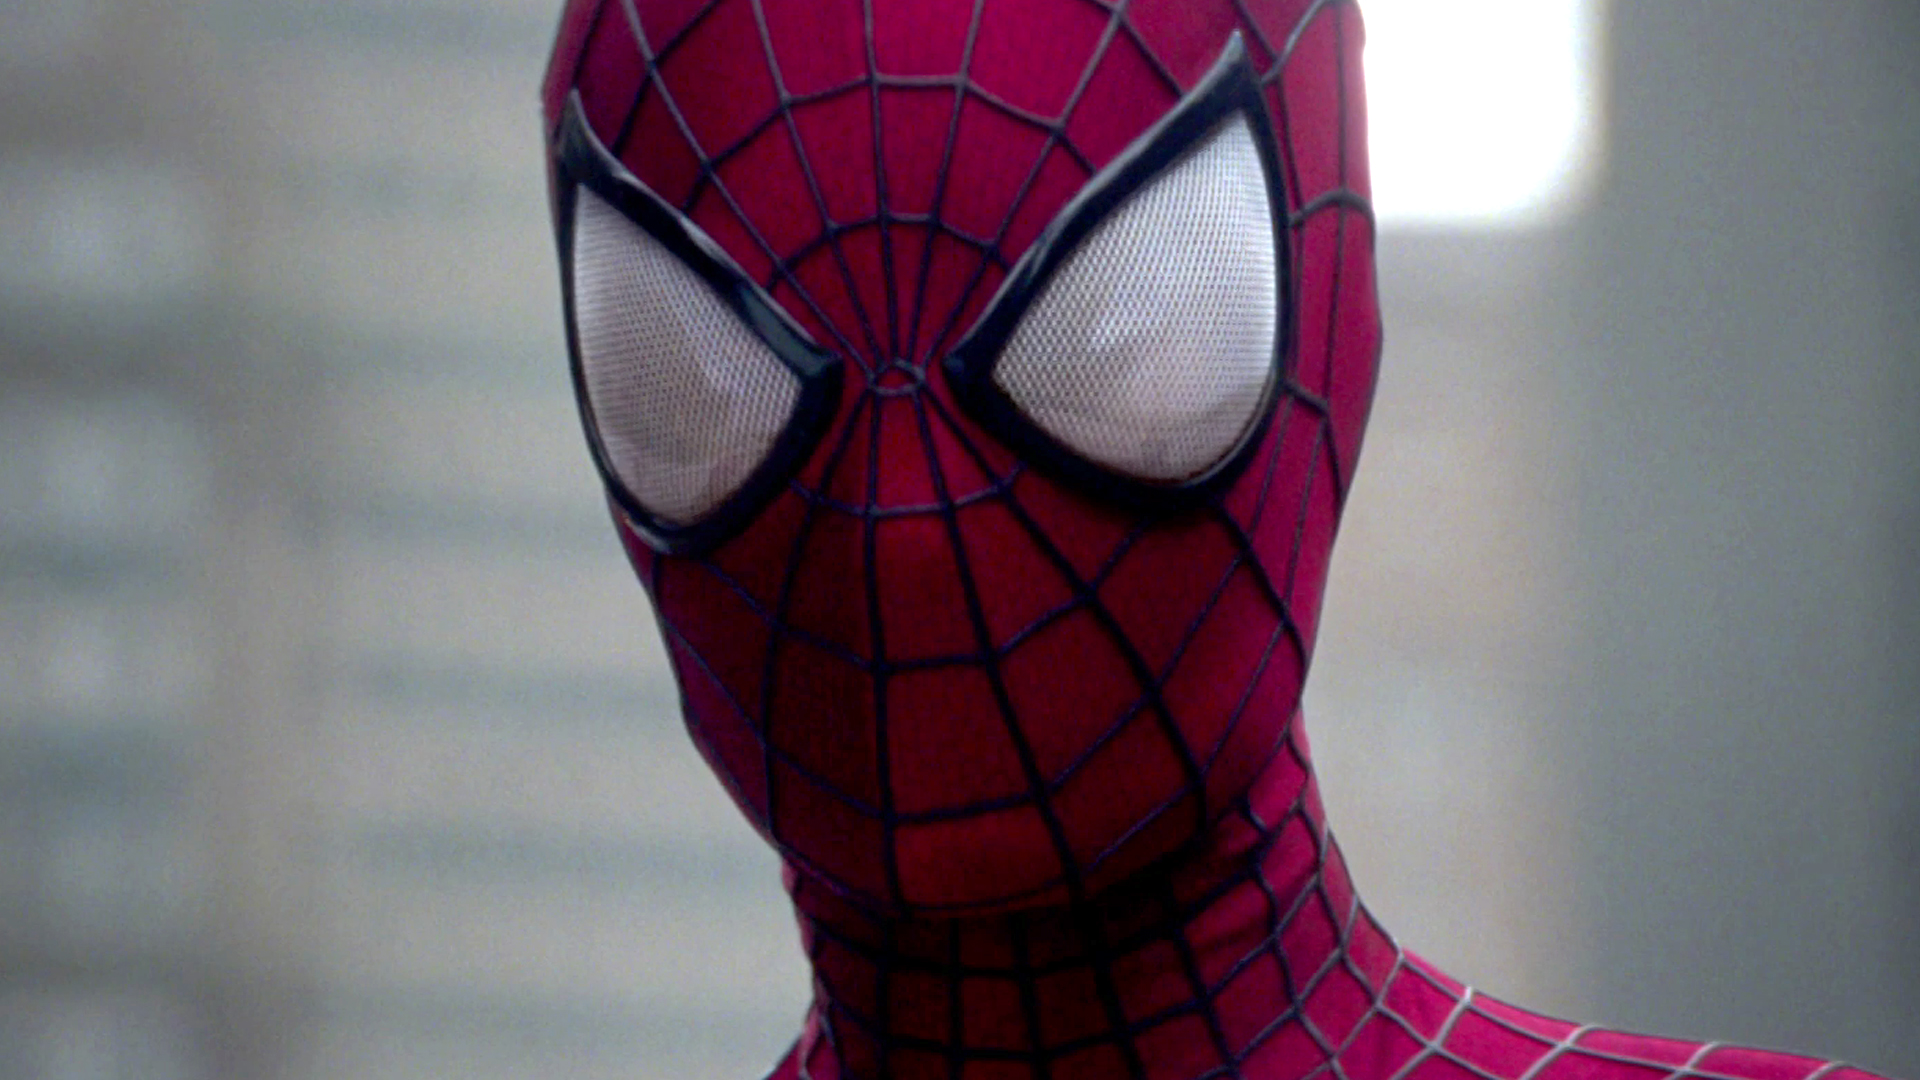 The AMAZING SPIDER-MAN 2 - Official Trailer #2 (HD) 